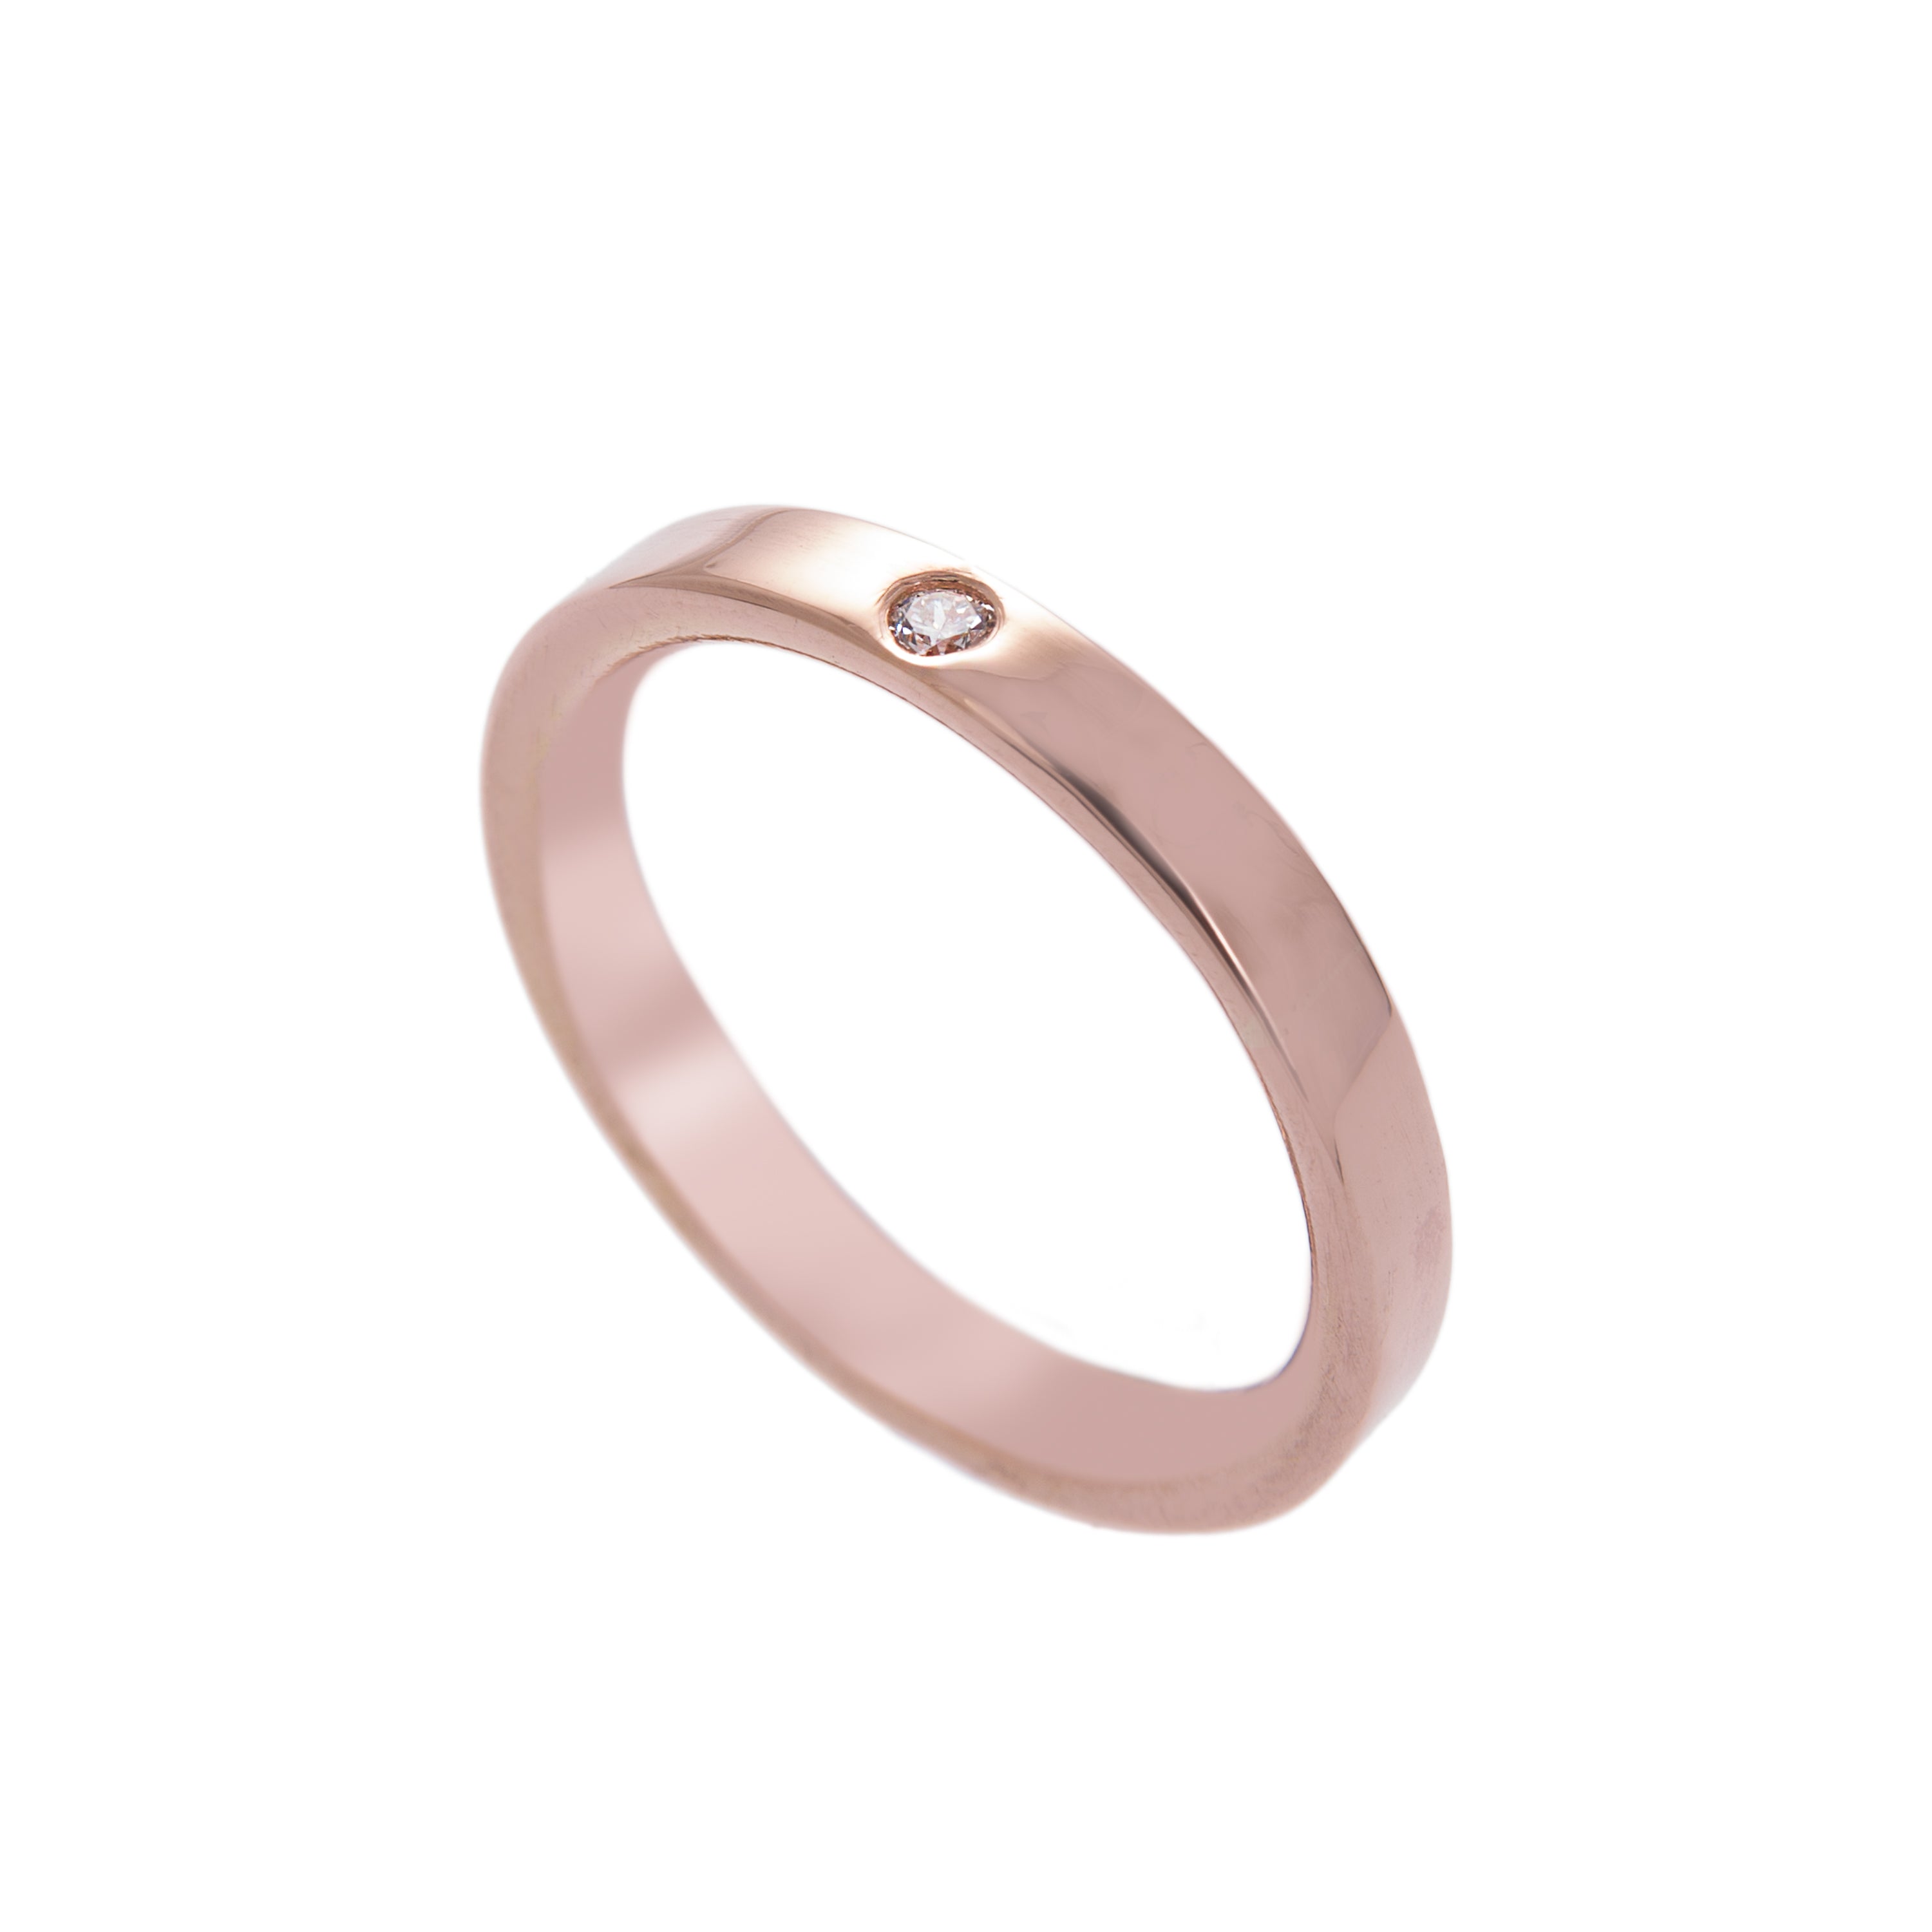 Rose Gold and Diamond Classic Wedding Ring